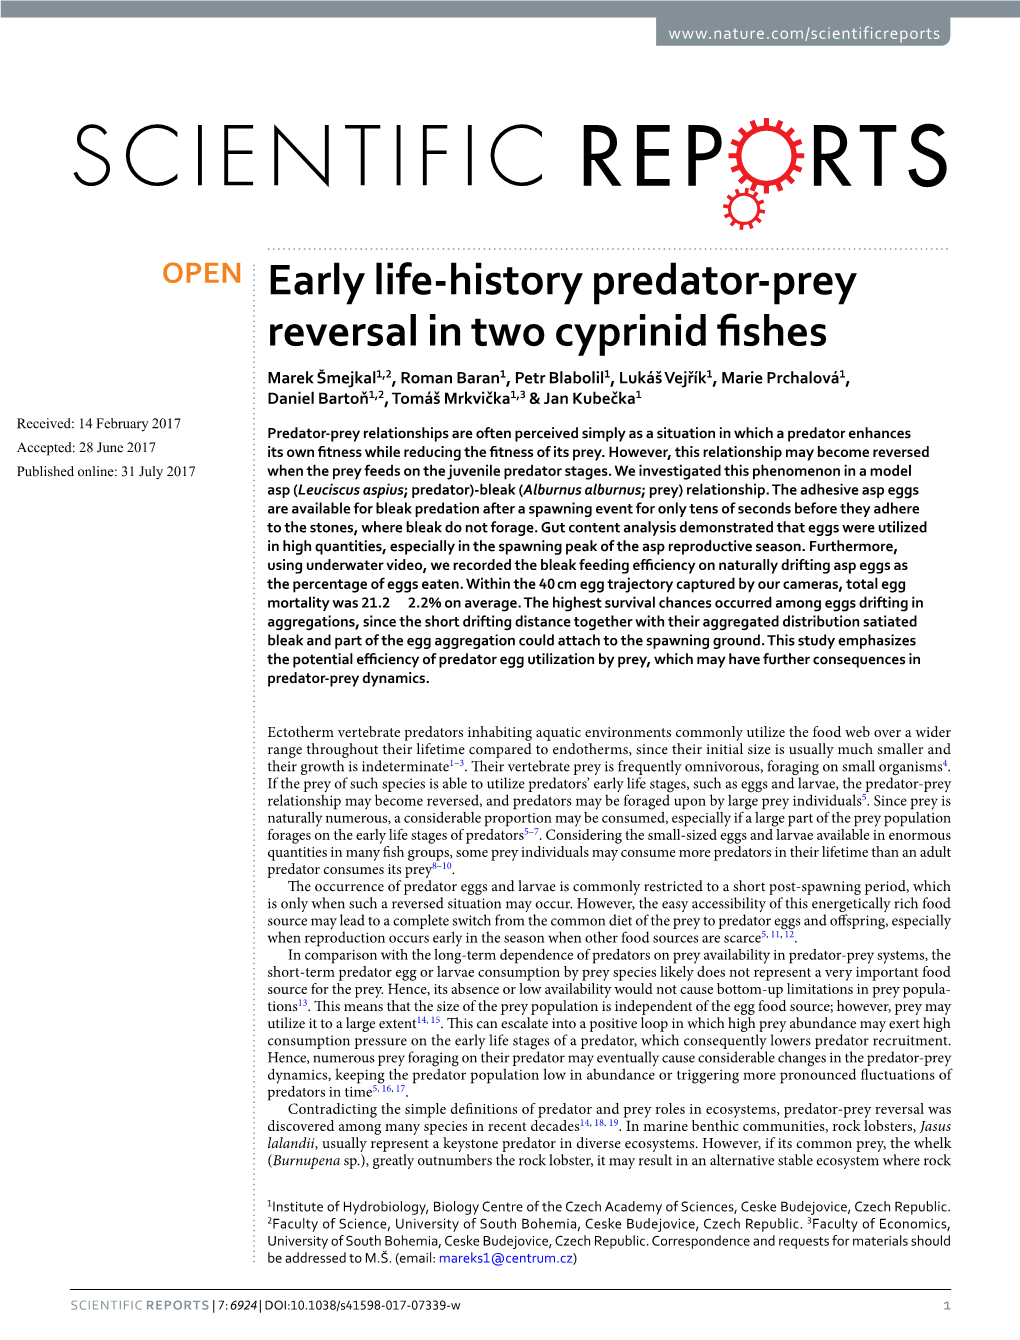 Early Life-History Predator-Prey Reversal in Two Cyprinid Fishes